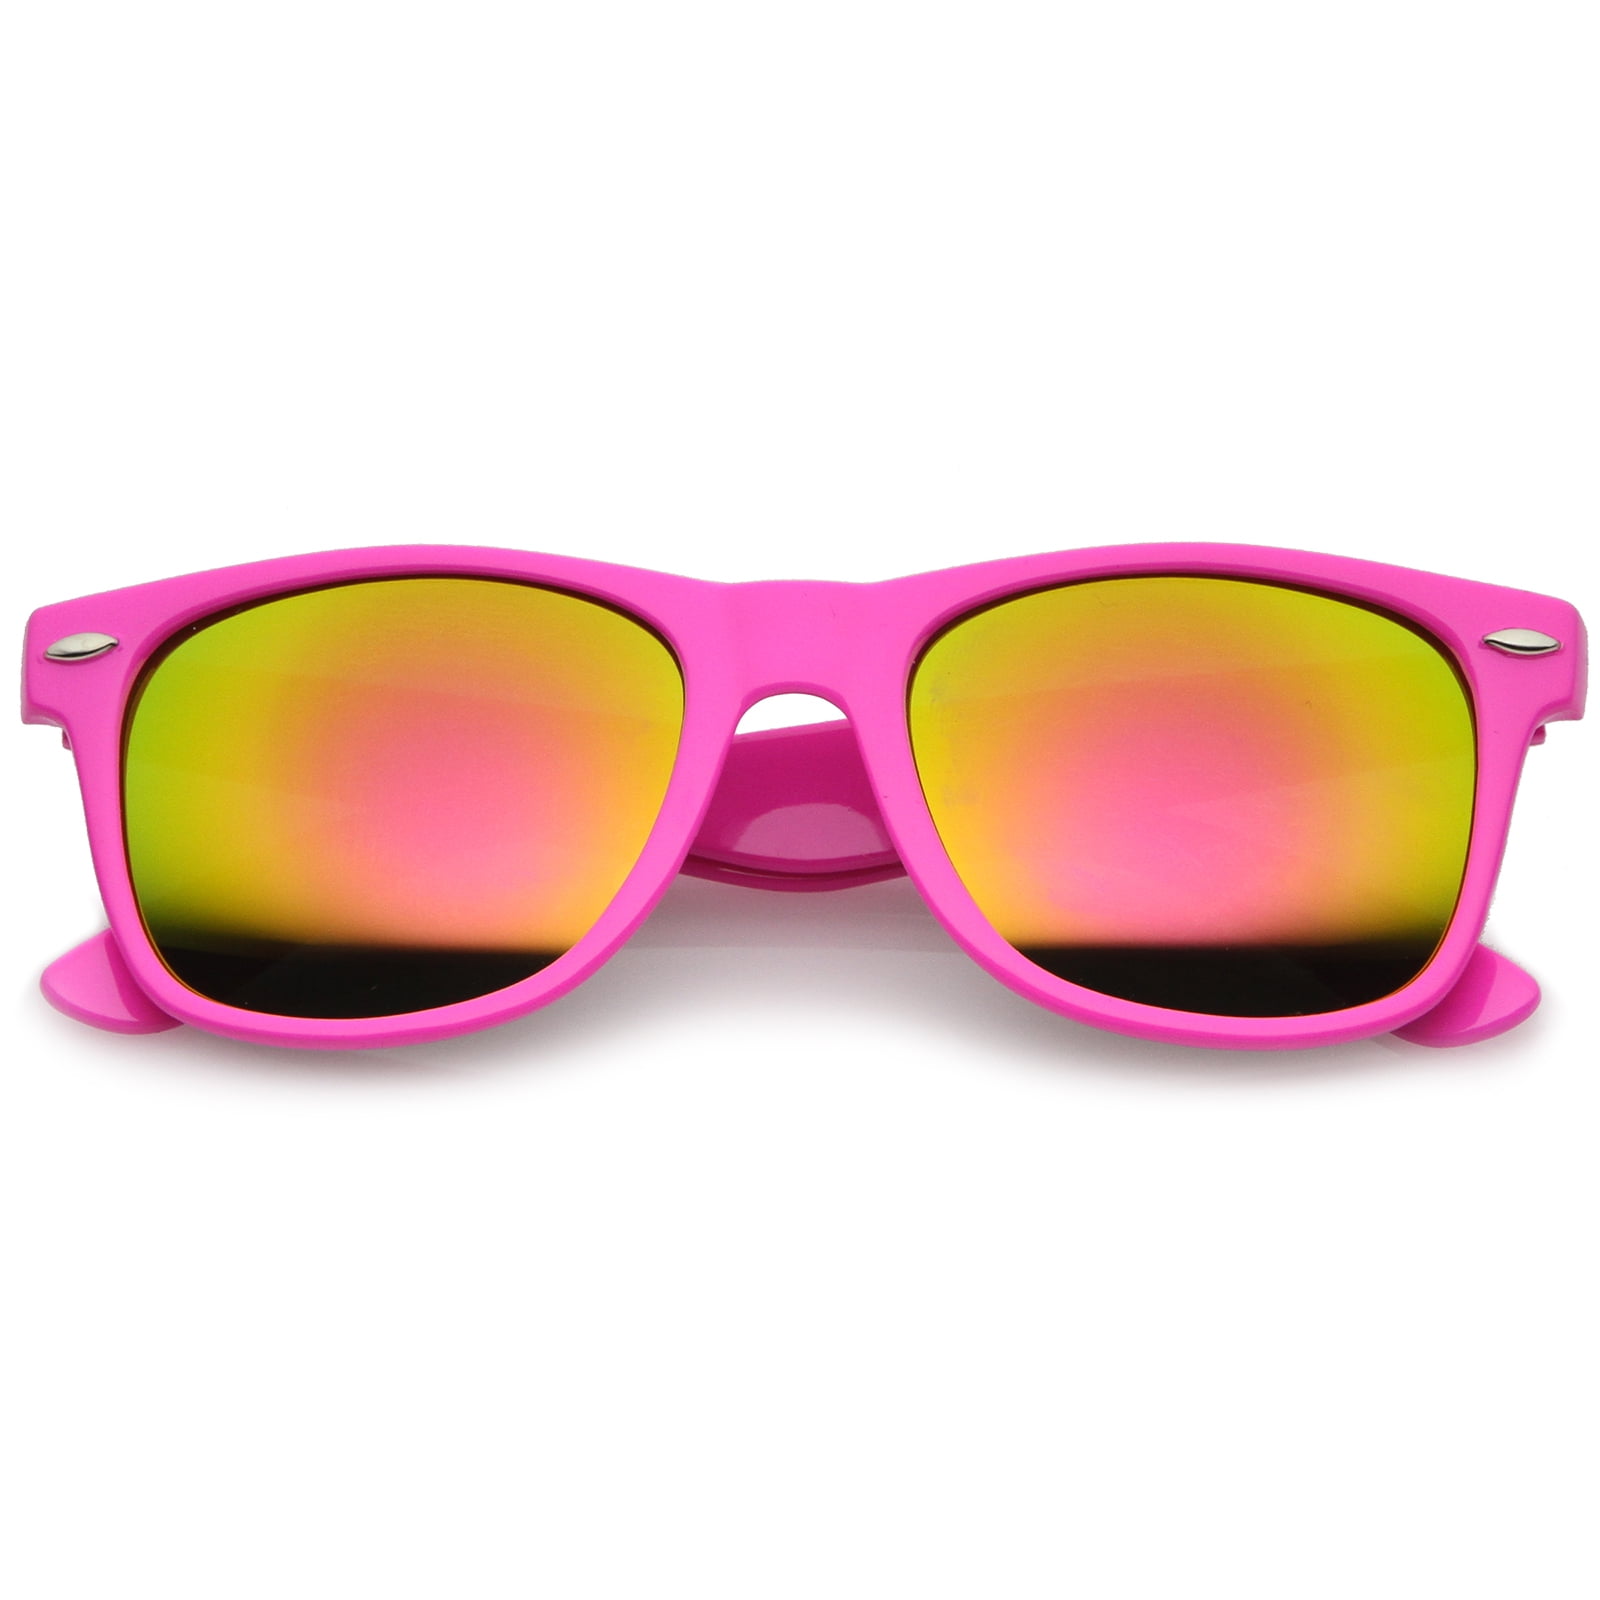 Retro Large Square Colored Mirror Lens Horn Rimmed Sunglasses 55mm Hot Pink Magenta Mirror